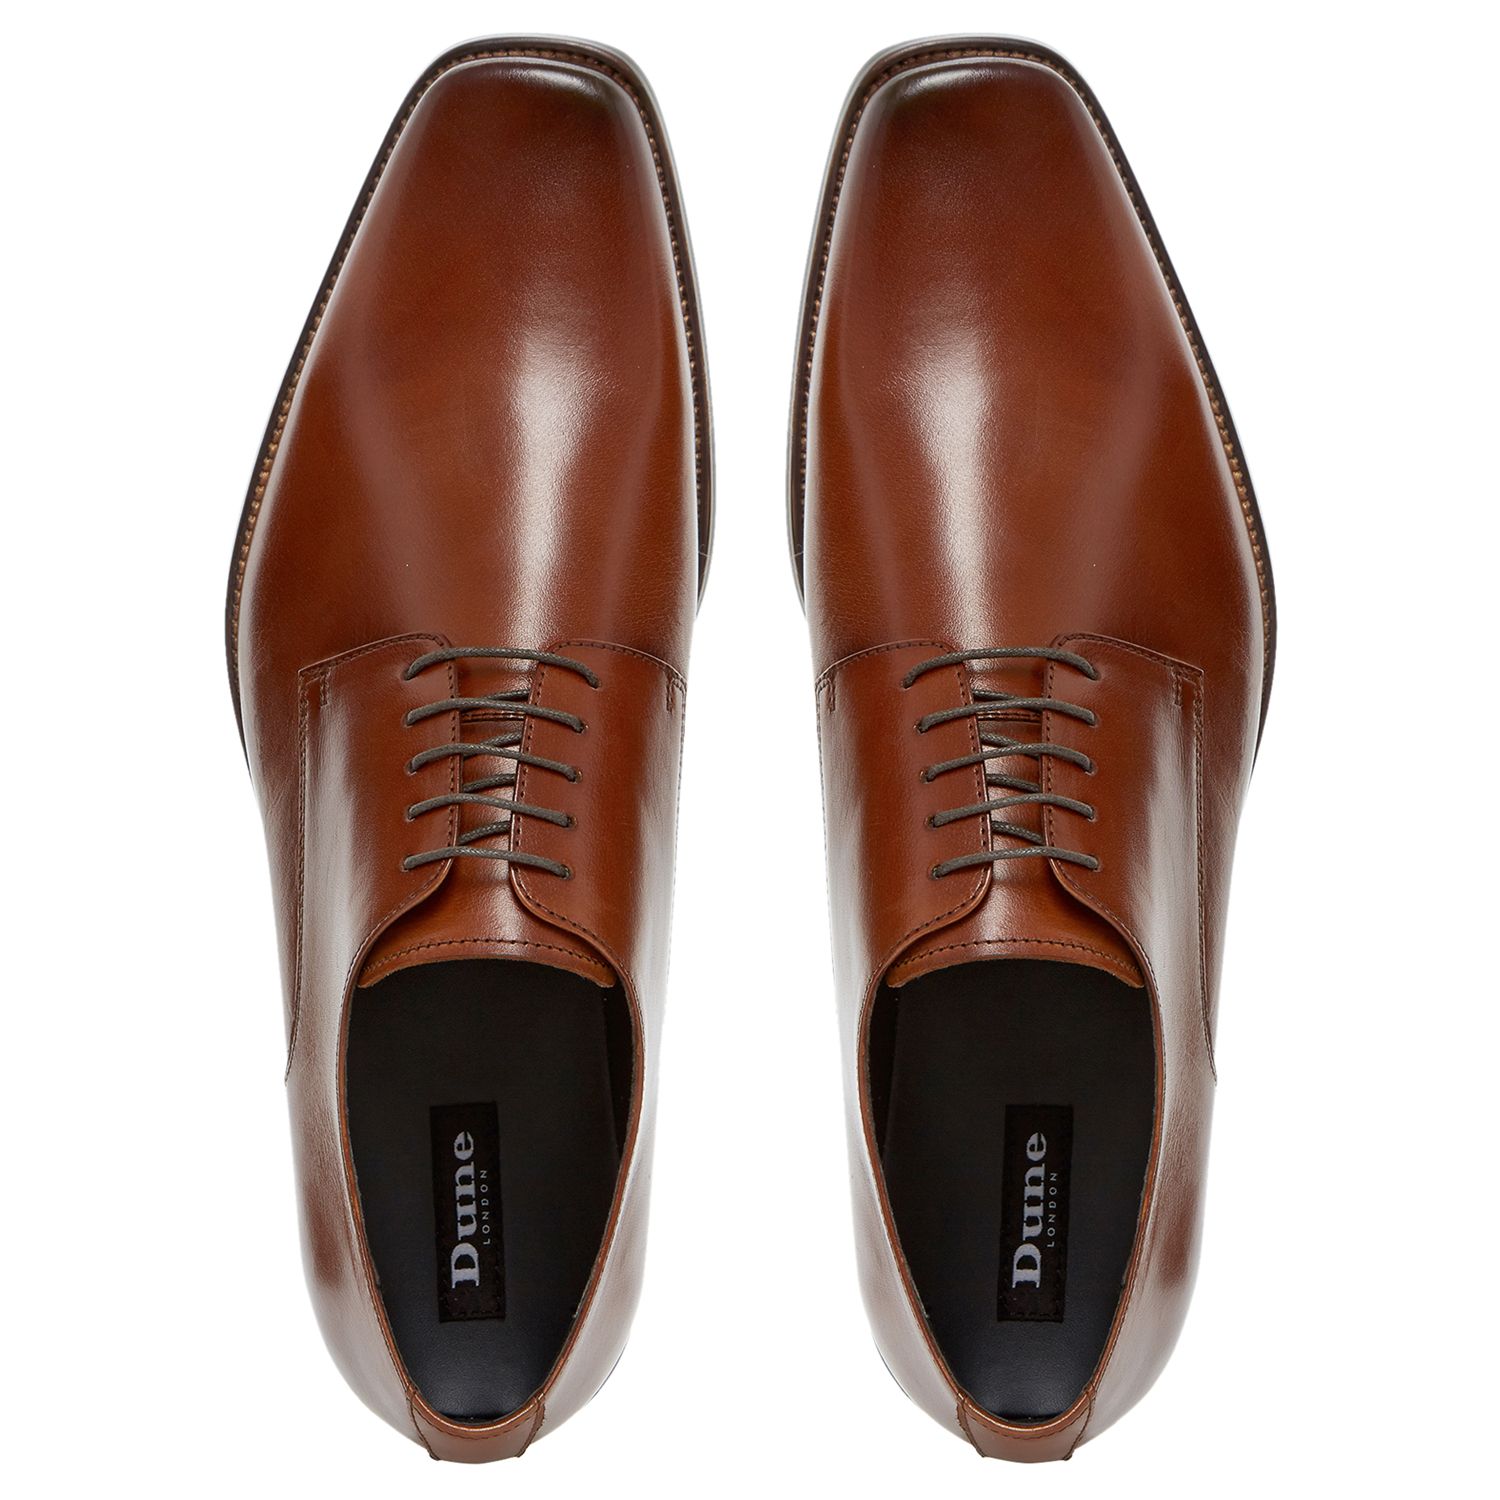 Dune Alphabet Square Toe Leather Derby Shoes at John Lewis & Partners